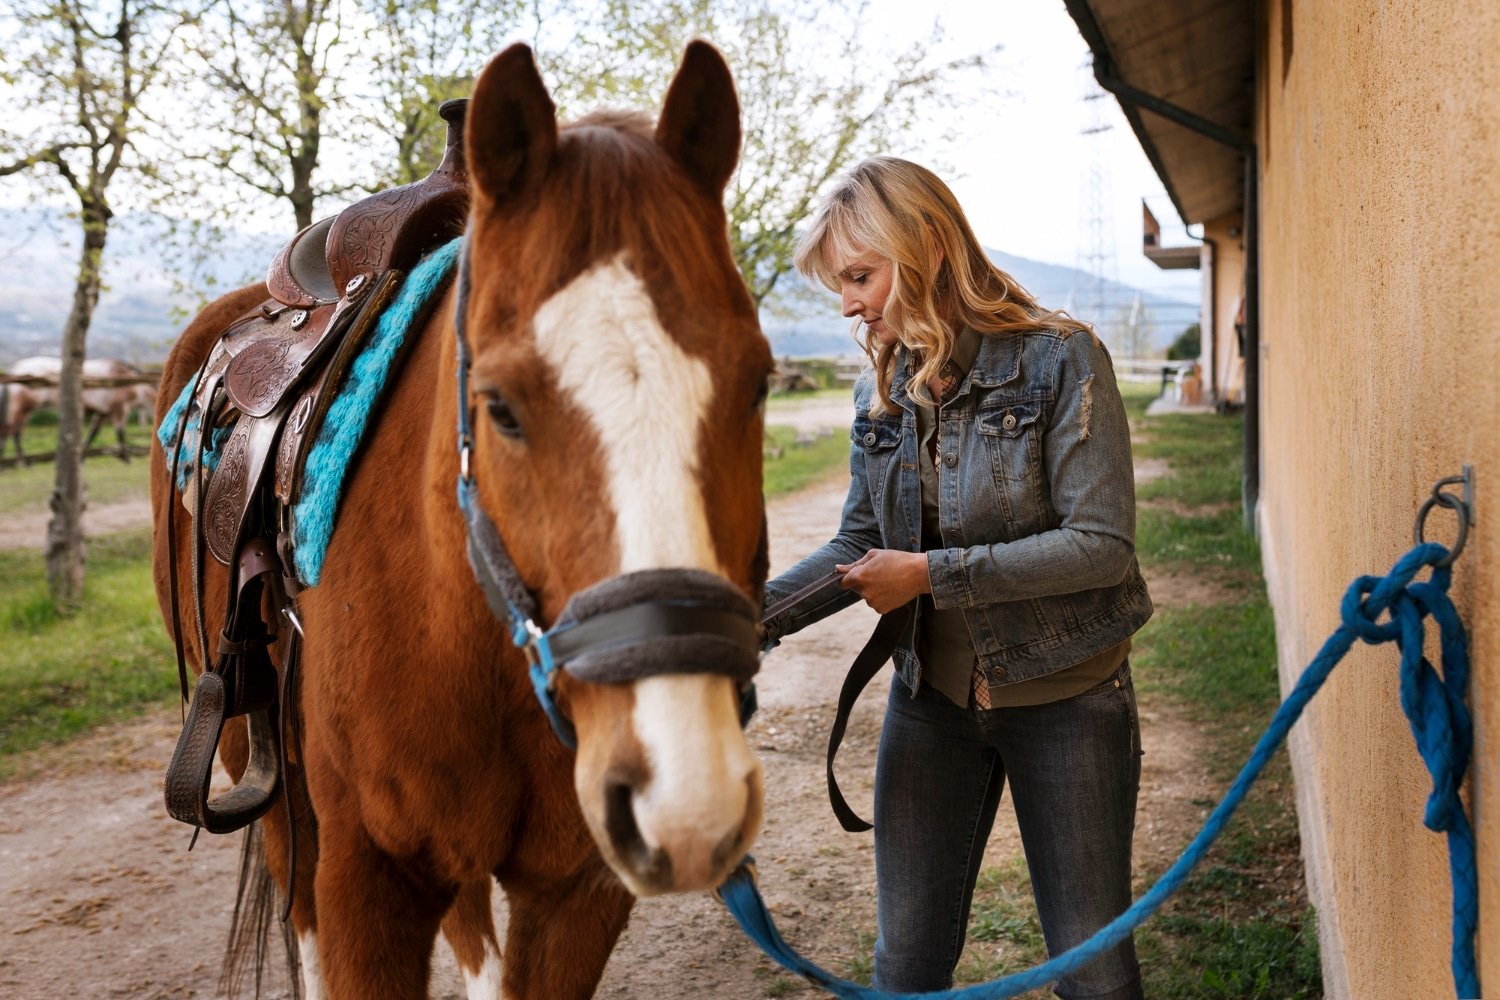 Care For Your Equine Friends With Horse.com’s Comprehensive Supplies